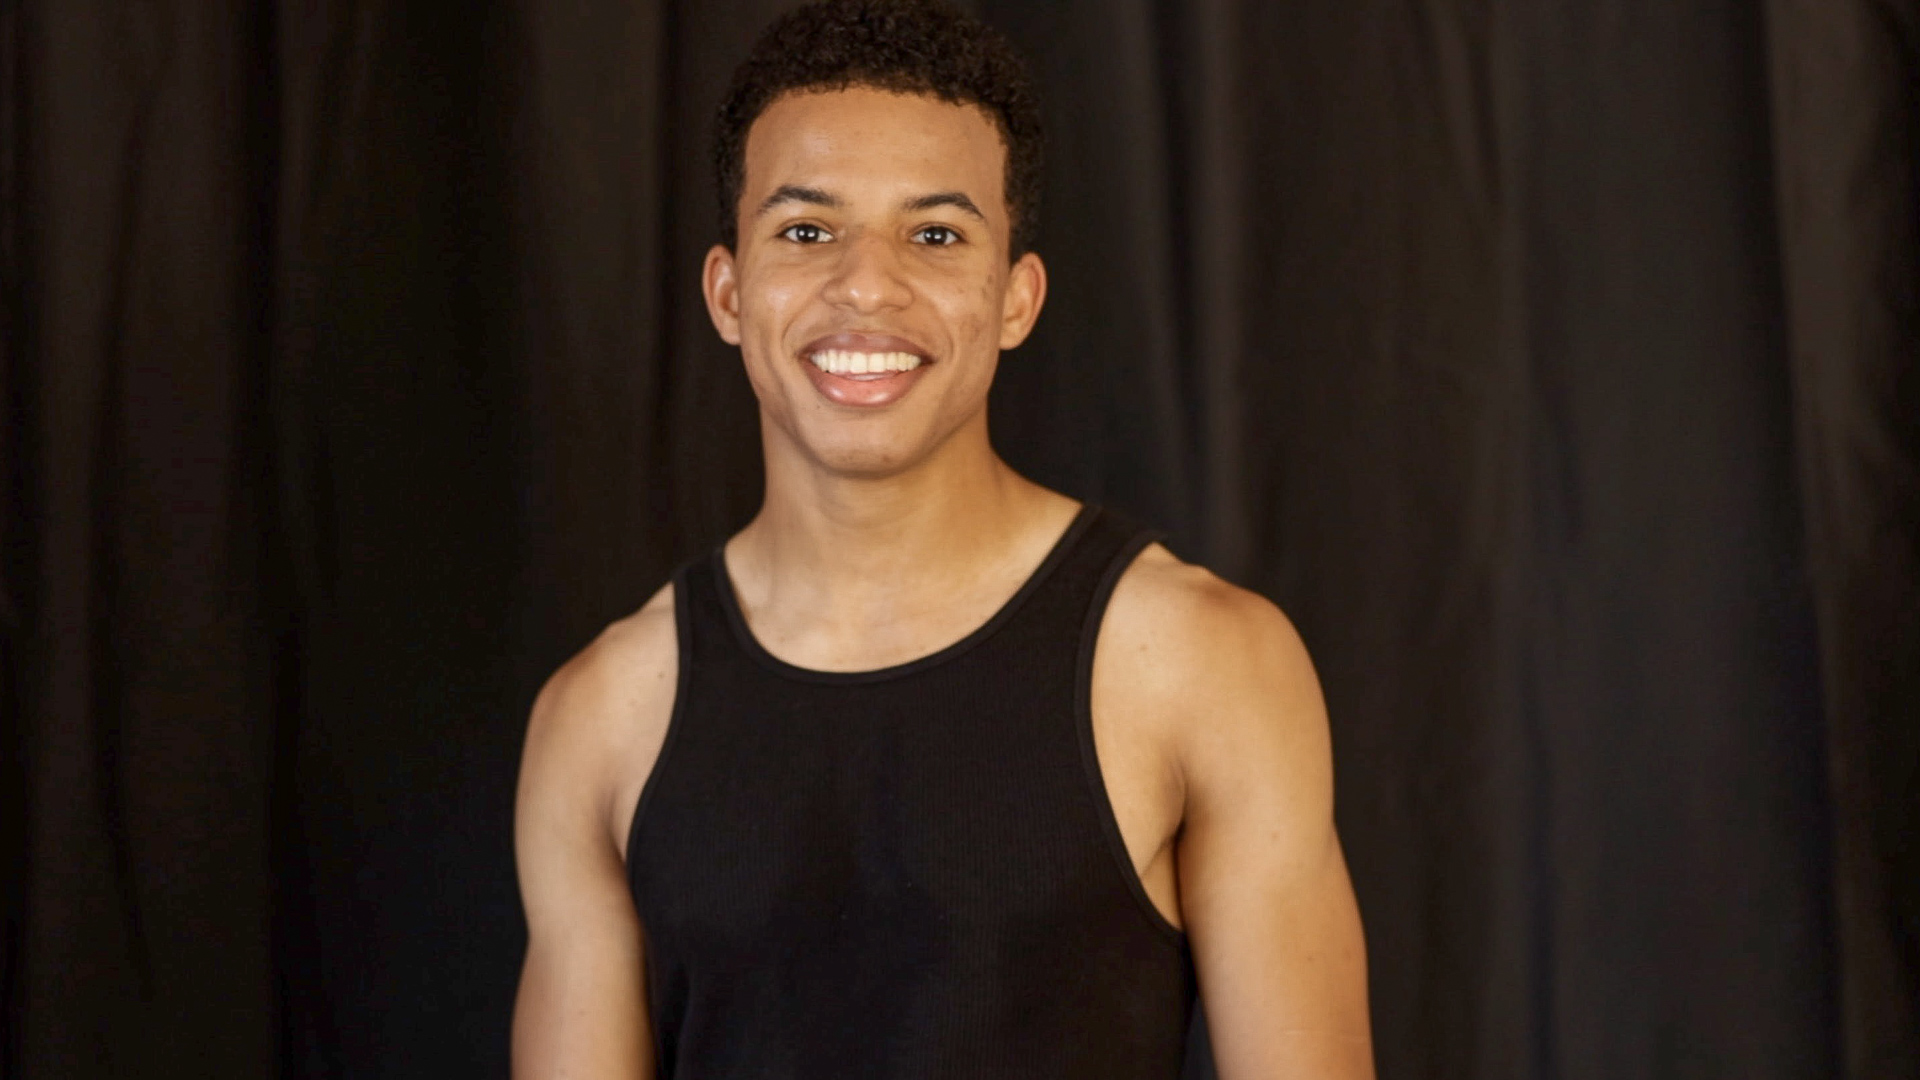 Get To Know New Guy Isaiah Ortega While He Has Fun With Our Interview Questions